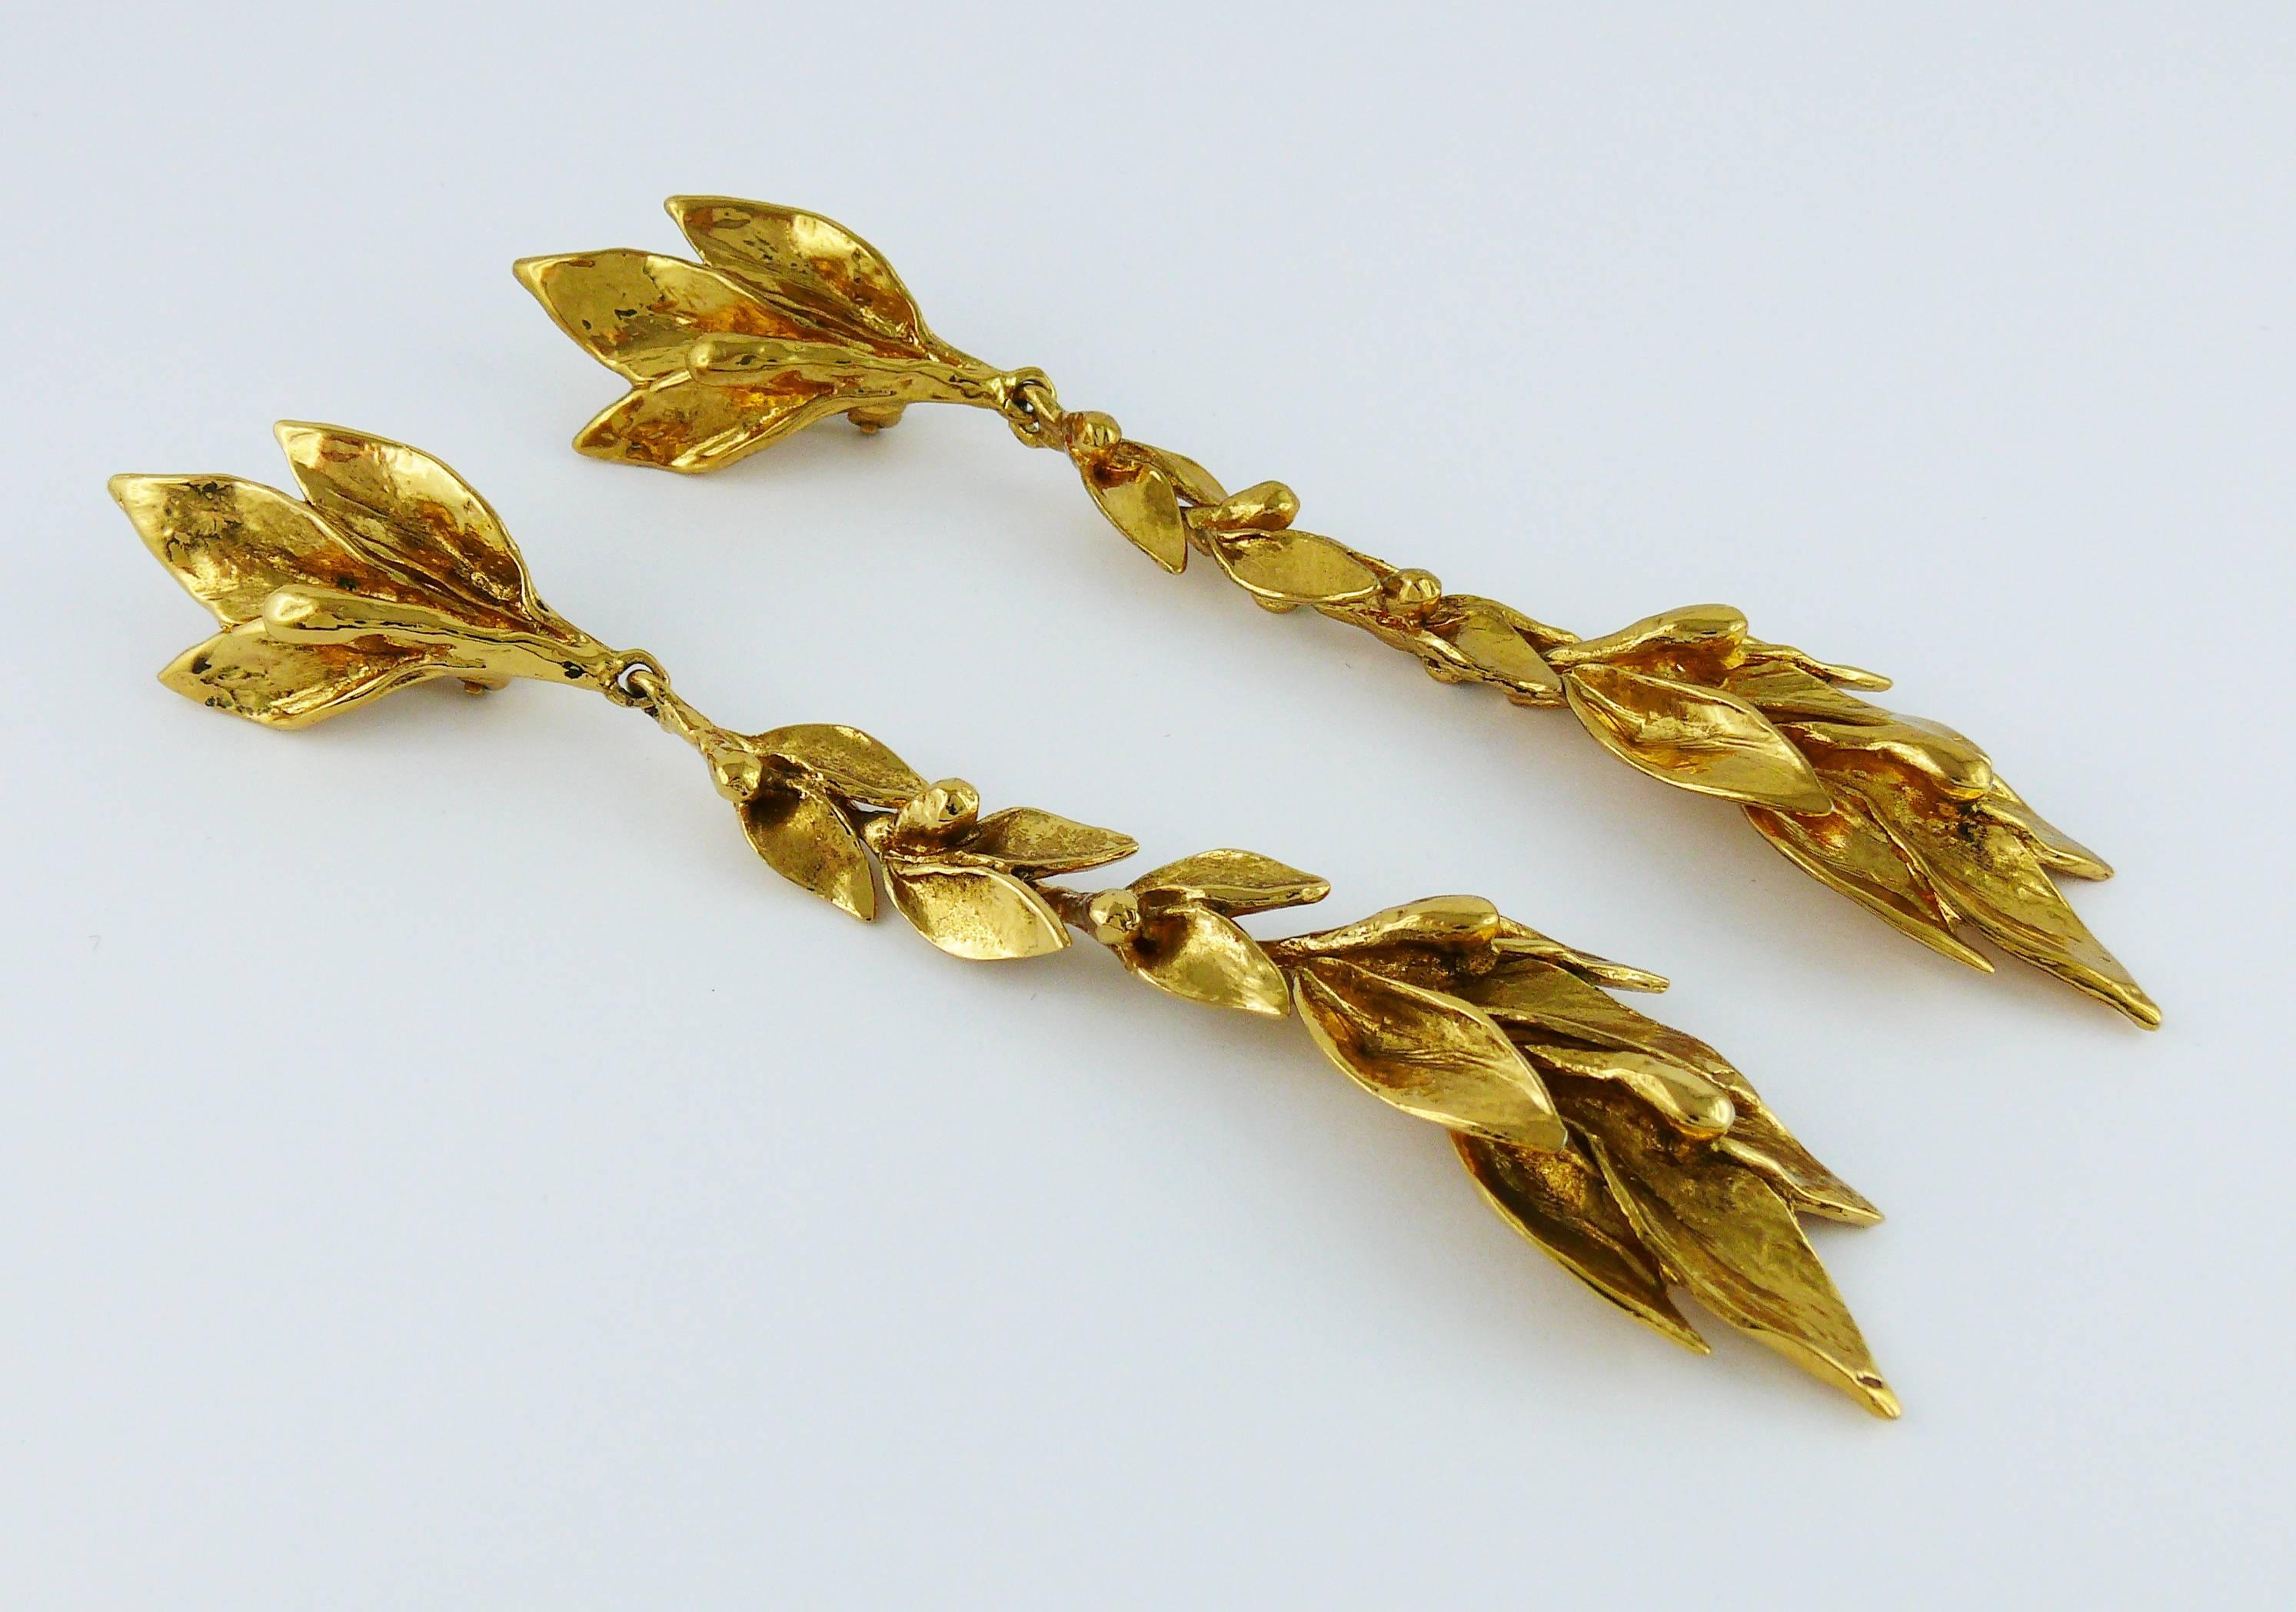 YVES SAINT LAURENT vintage gold toned floral shoulder duster dangling earrings (clip-on).

Marked YSL Made in France.

Indicative measurements : length approx. 13.5 cm (5.31 inches) / max. width approx. 2.4 cm (0.94 inch).

JEWELRY CONDITION CHART
-